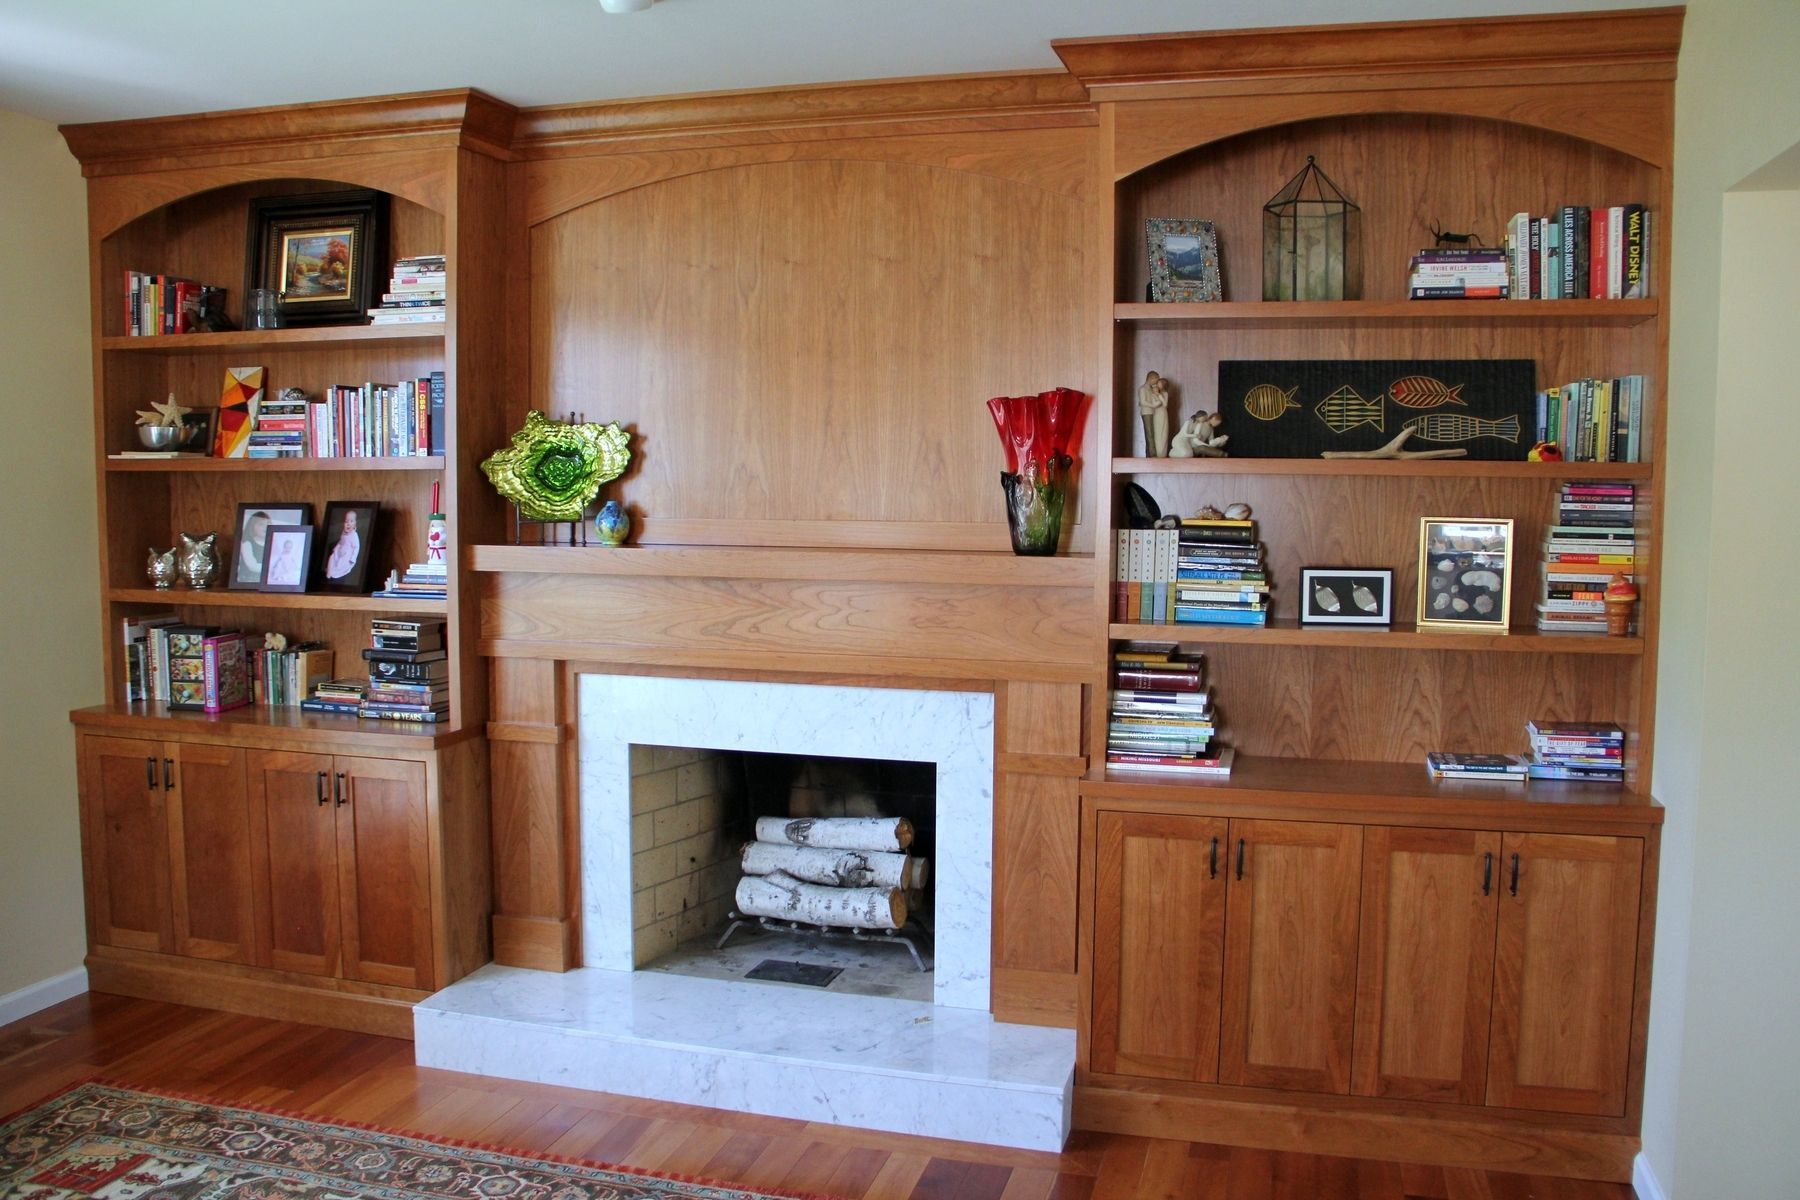 Fireplace Surround Bookshelves Fresh Built In Bookcases with Fireplace Cj29 – Roc Munity